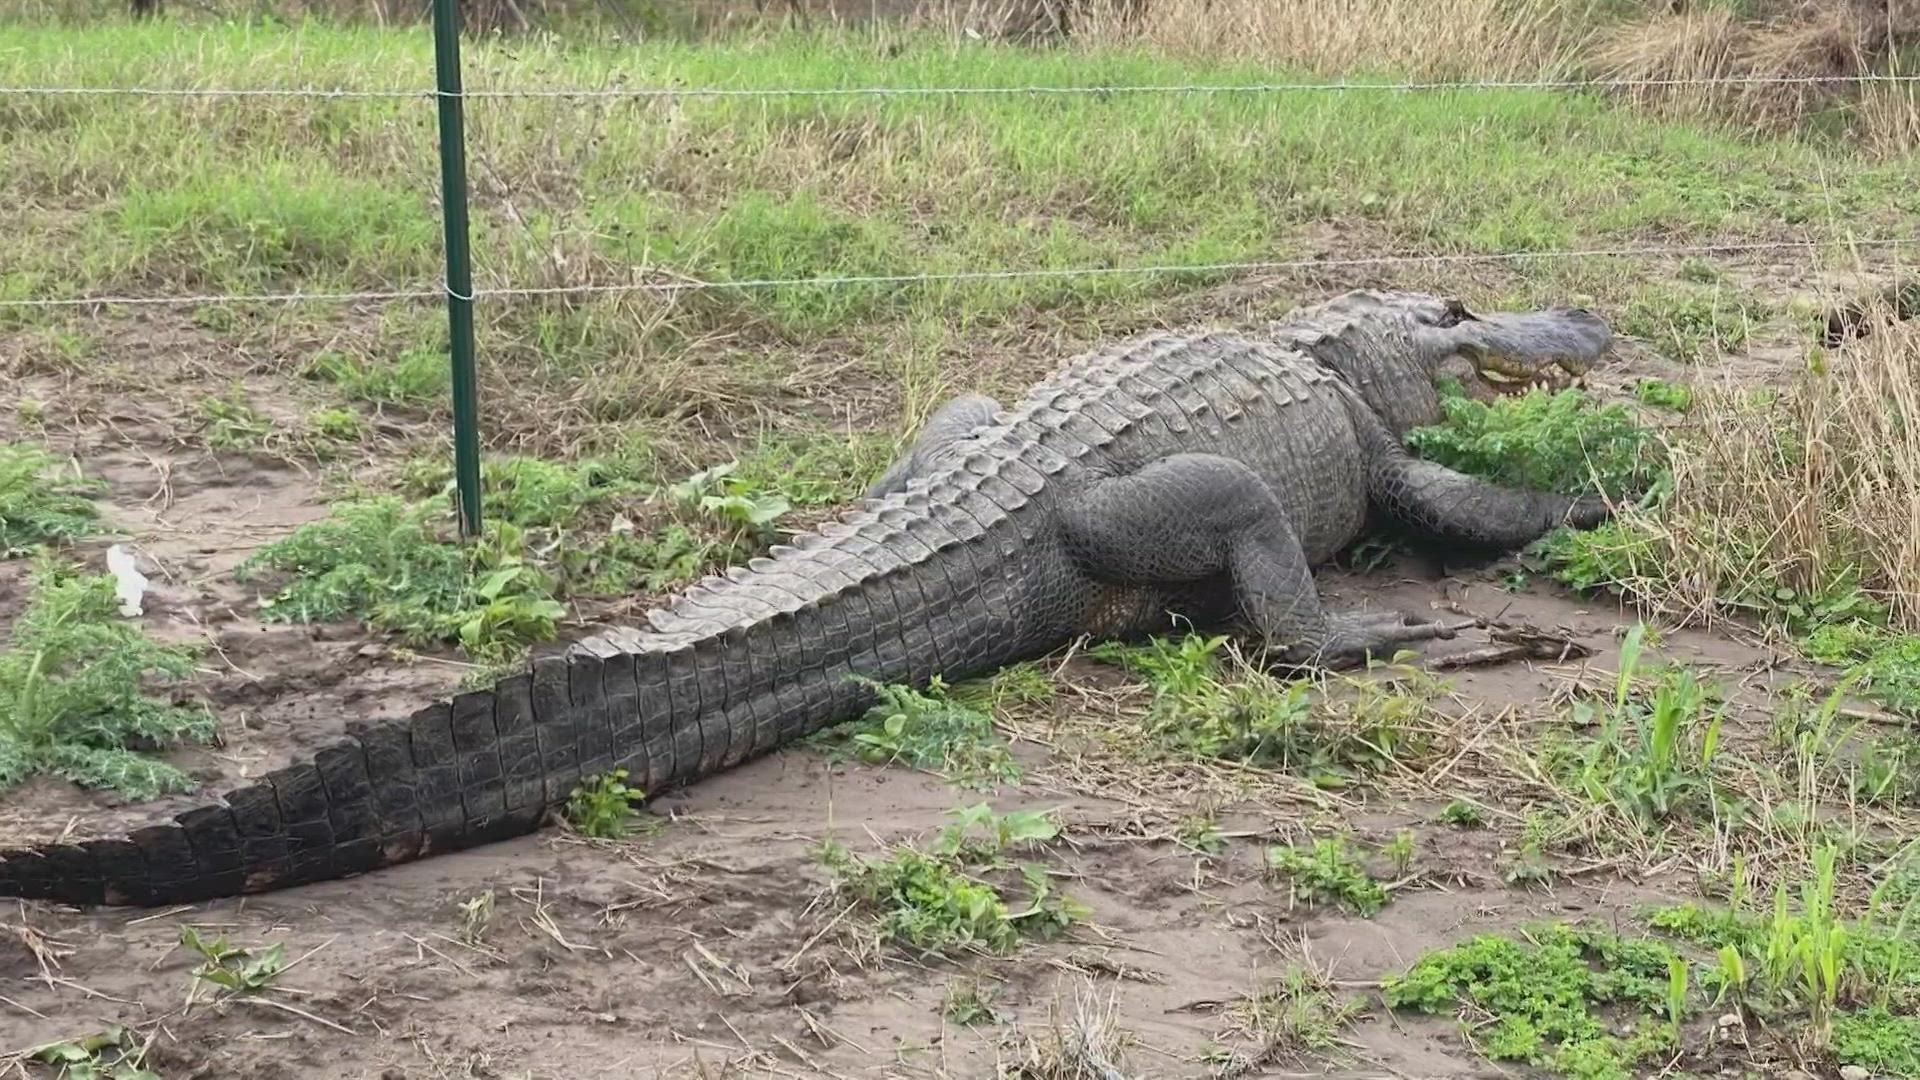 An alligator was taking a walk this morning when it was spotted. Sheriff's in Atascosa County safely took care of the situation.